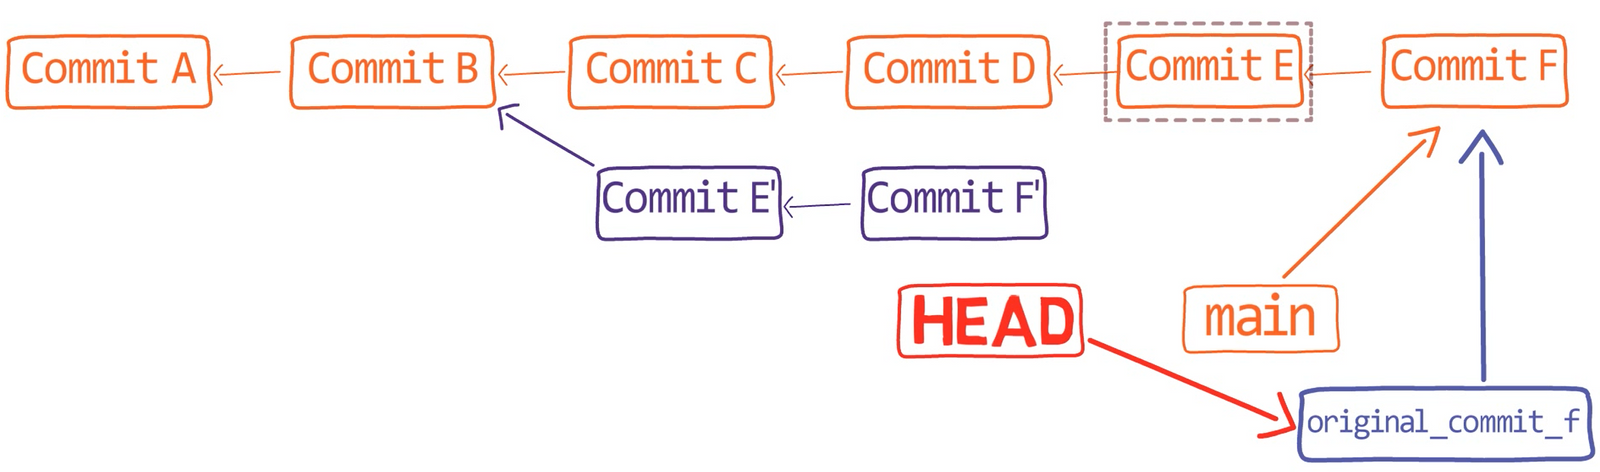 The current history, considering "Commit E"